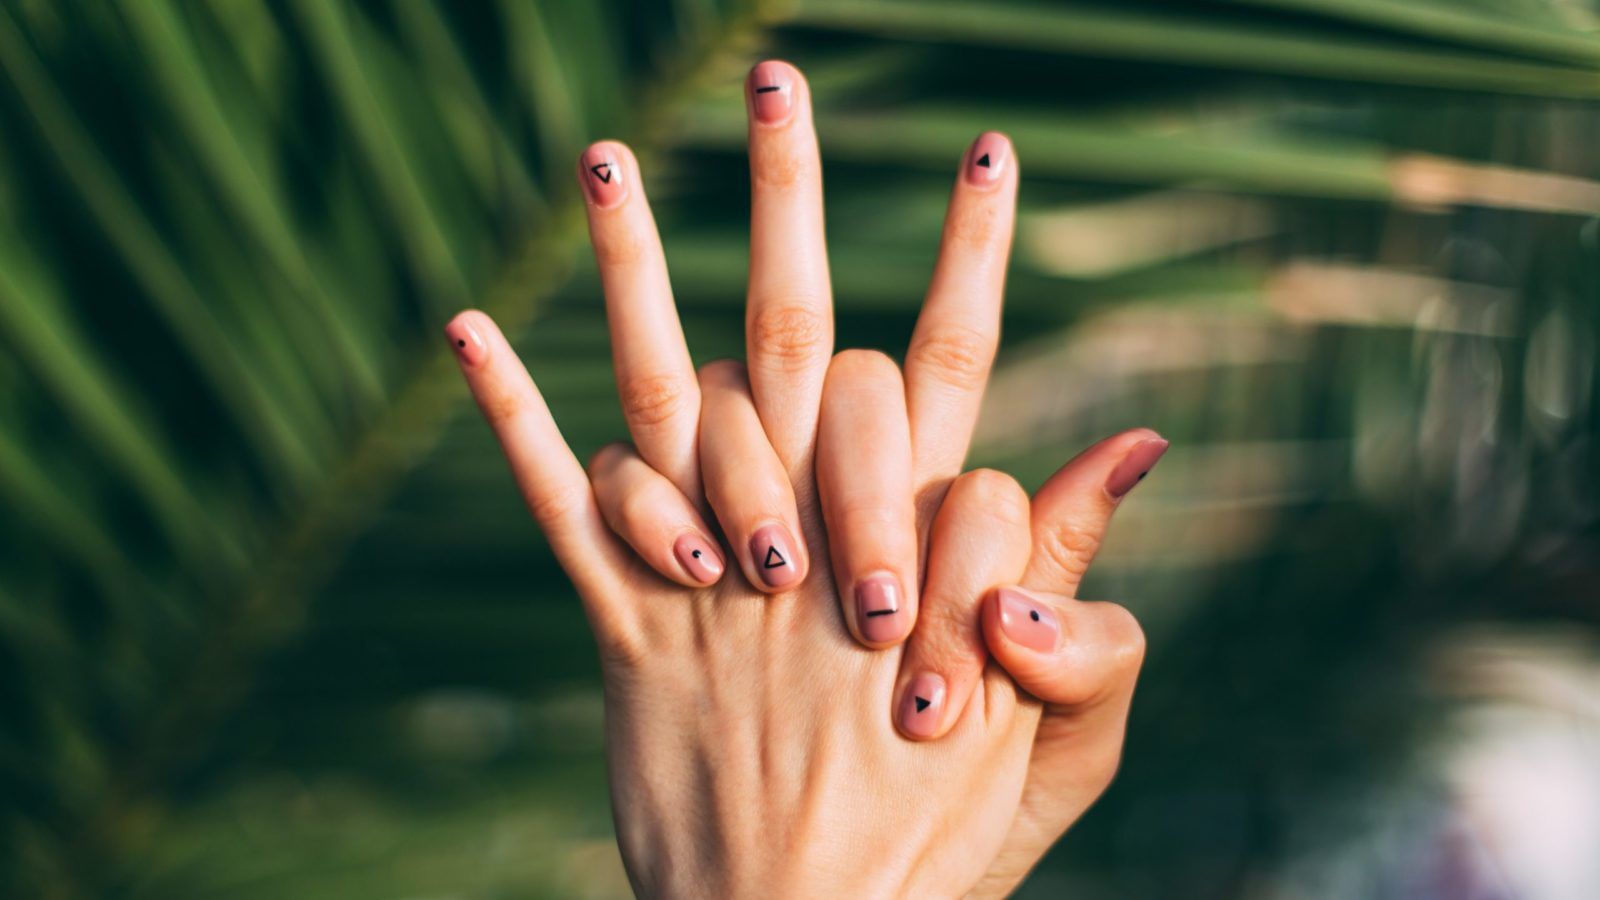 Seek out these non-toxic nail polishes for your home manicure